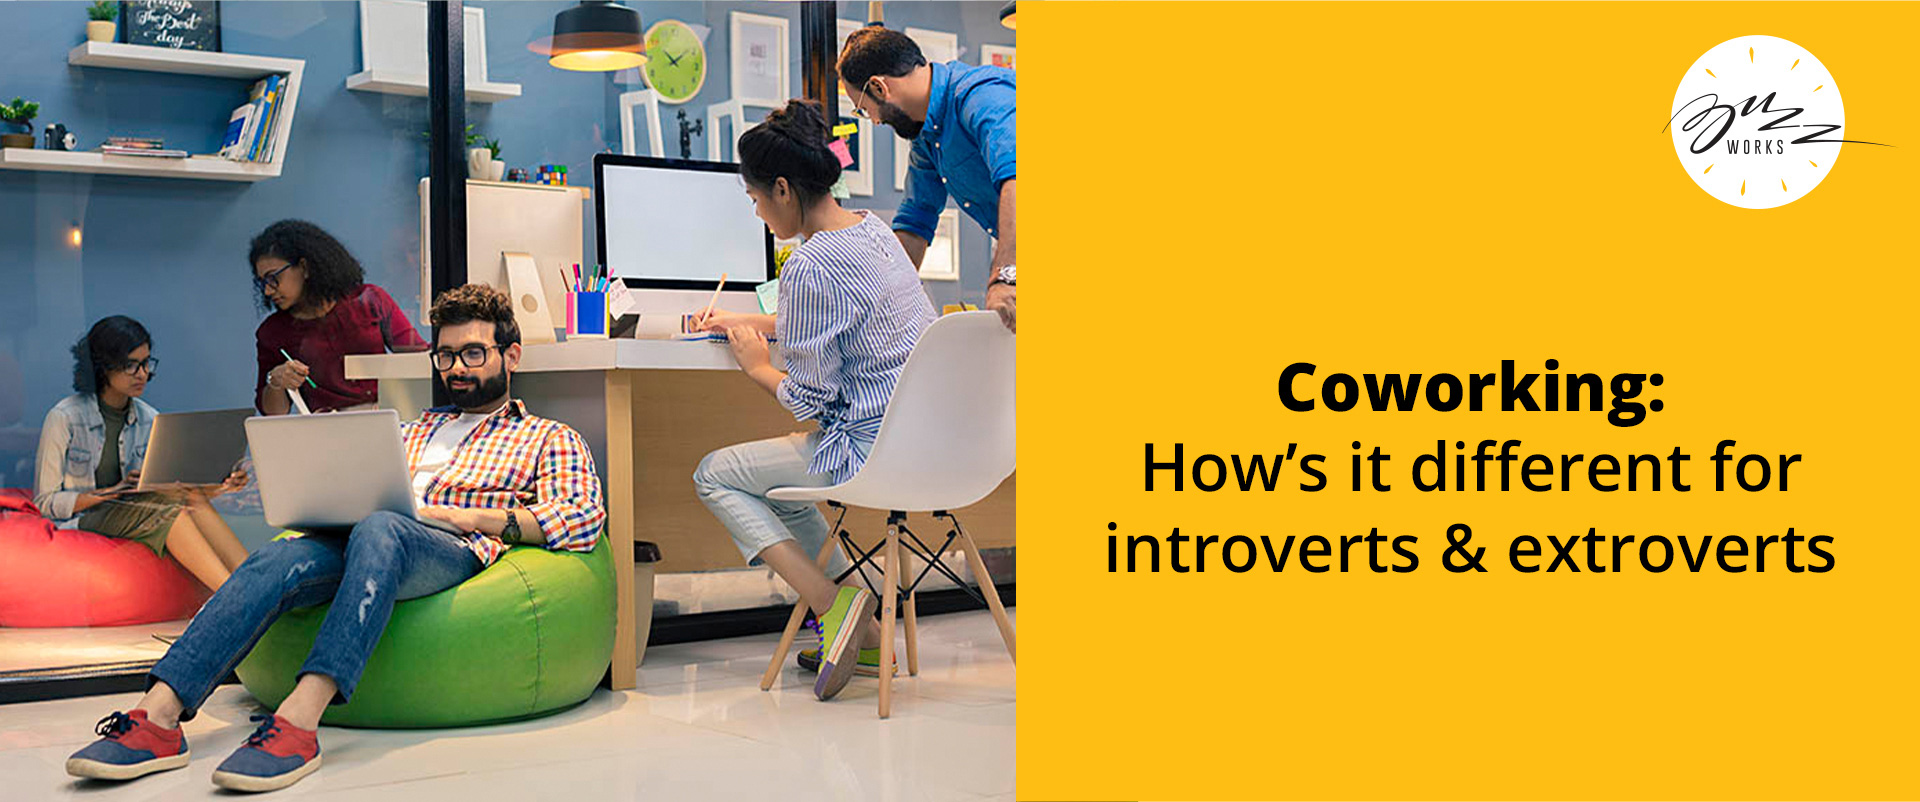 How’s it different for introverts & extroverts